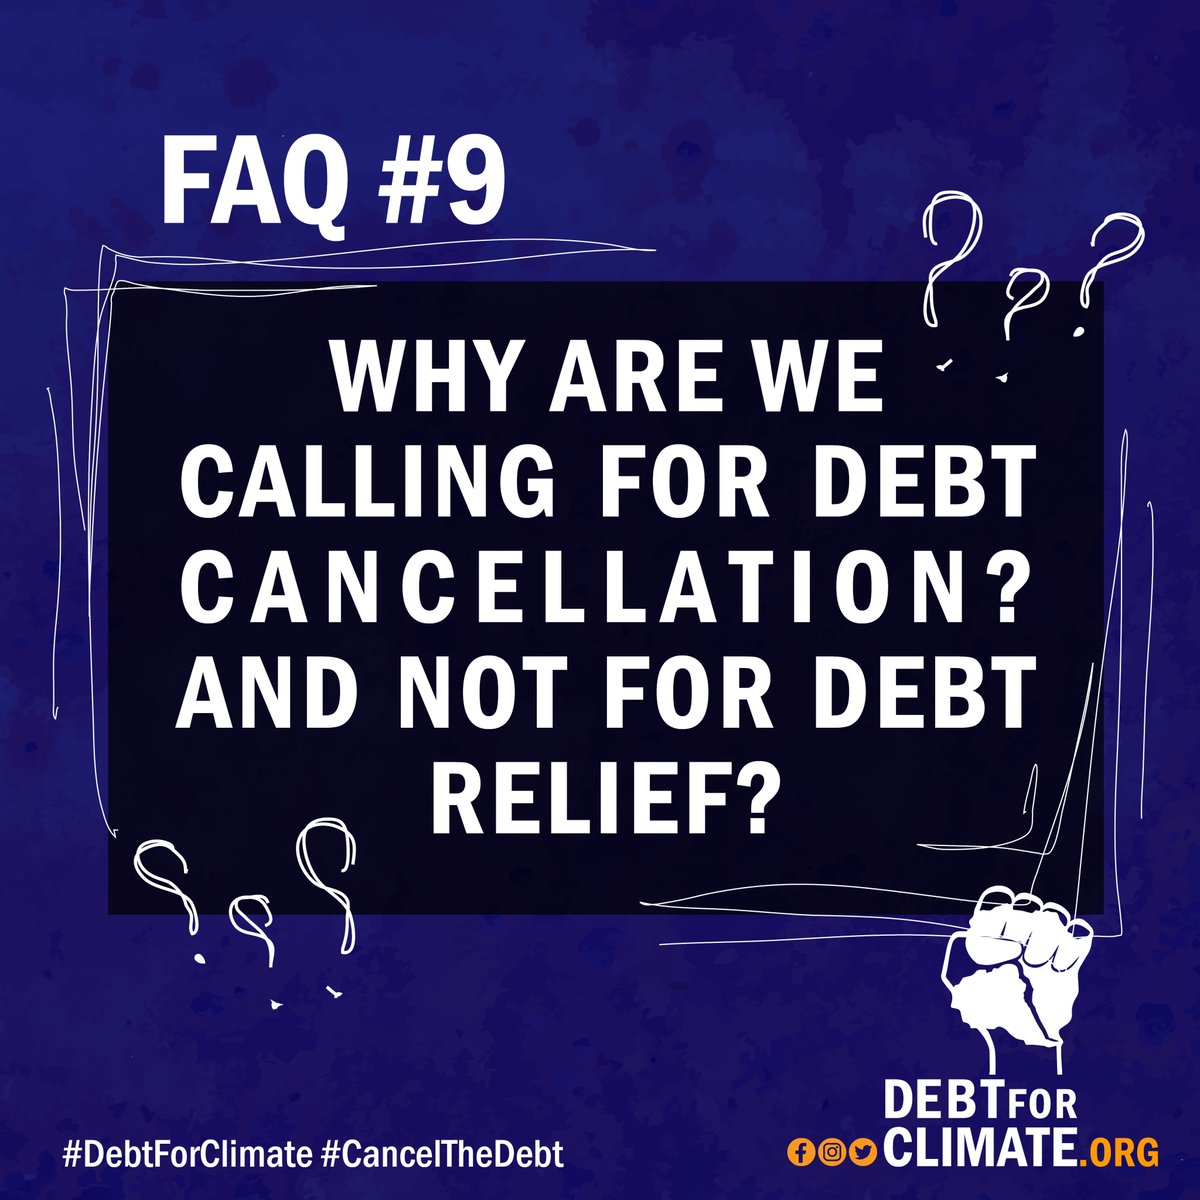 FAQ #9 1/8: Why are we calling for debt cancellation? And not for debt relief⁉️ Read and share this!📝 #debtjustice #debtcancellation #DebtforClimate #cancelthedebt #DebtEmergency